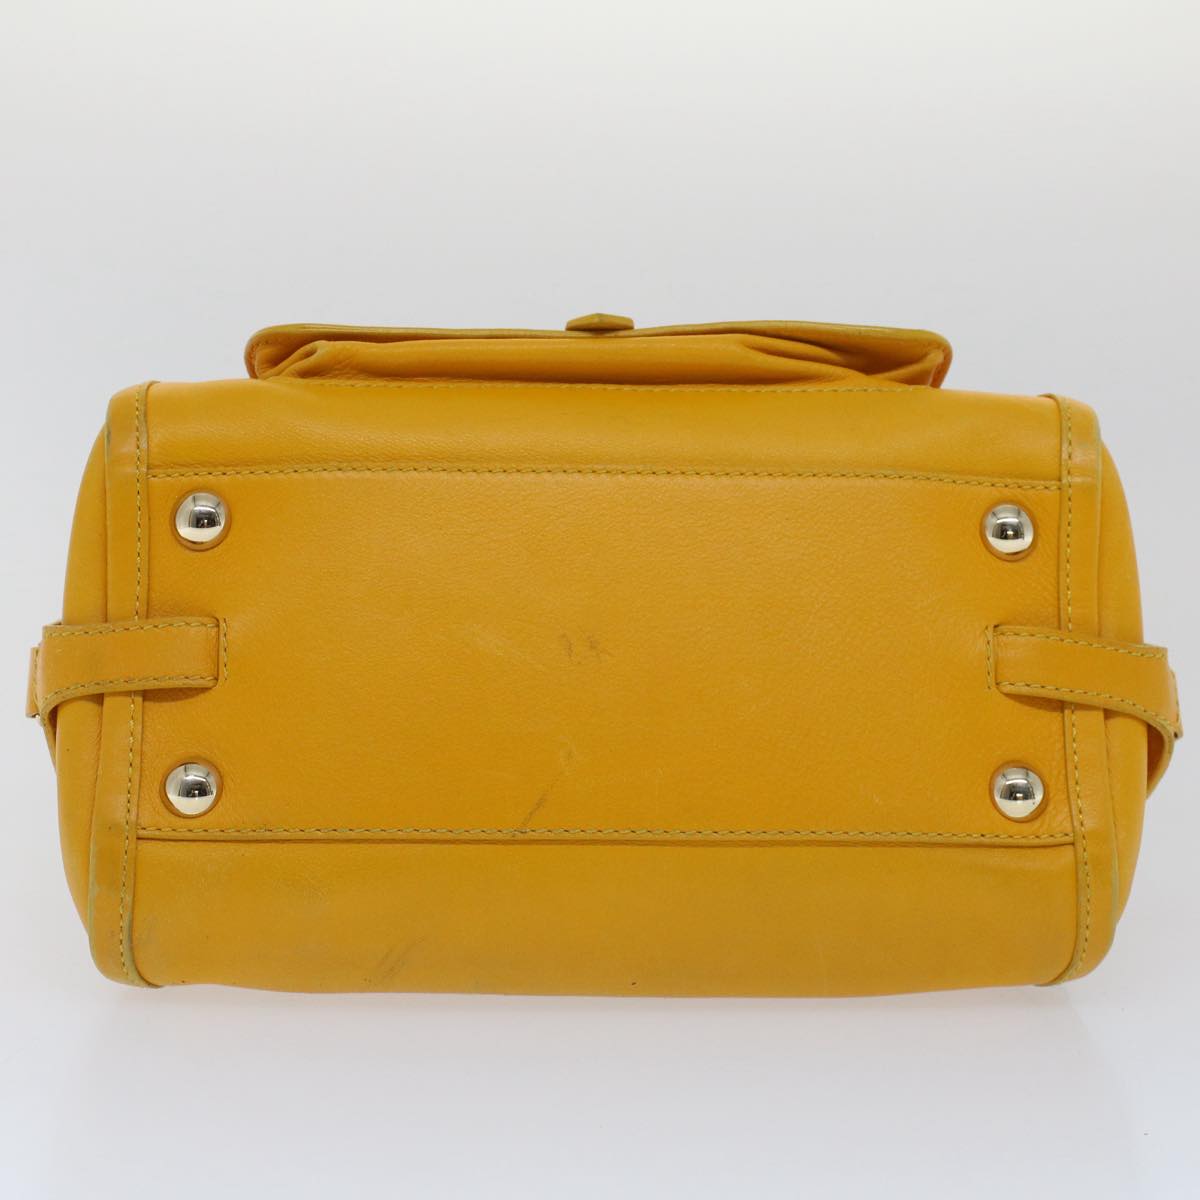 CELINE Hand Bag Leather Yellow Auth bs7391